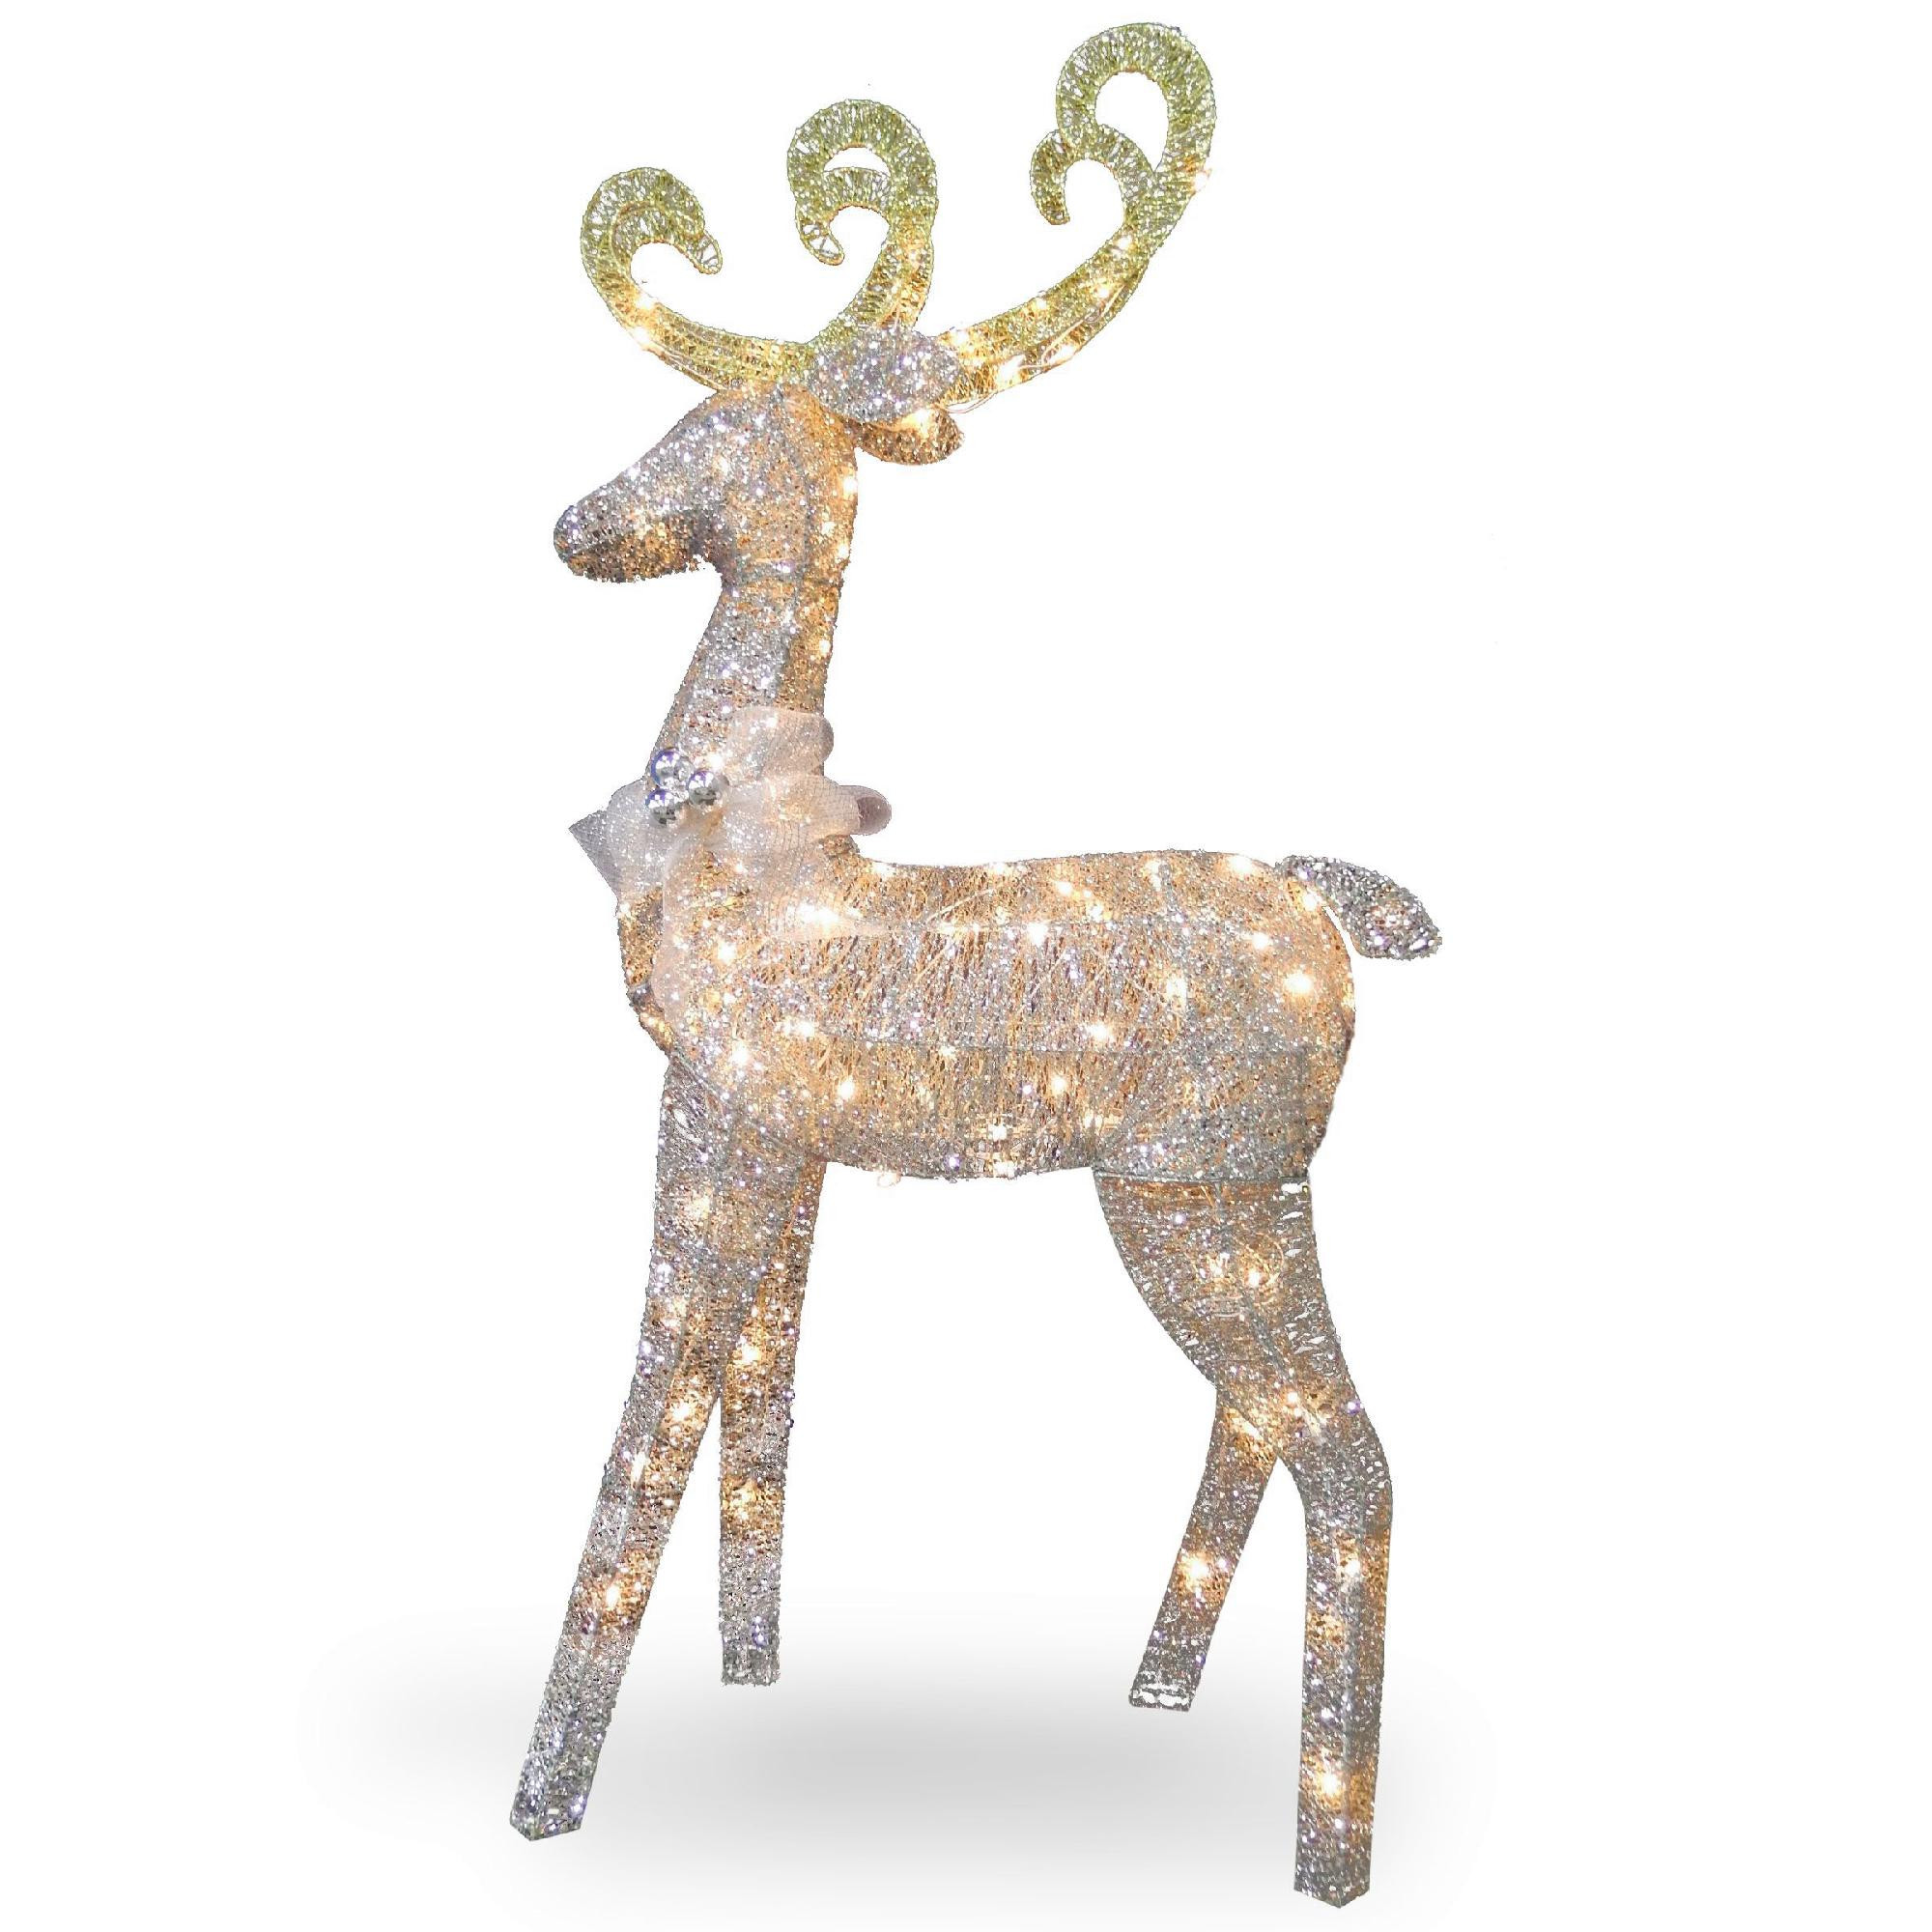 Christmas Deer Decor
 National Tree pany 60" Reindeer Decoration with Clear